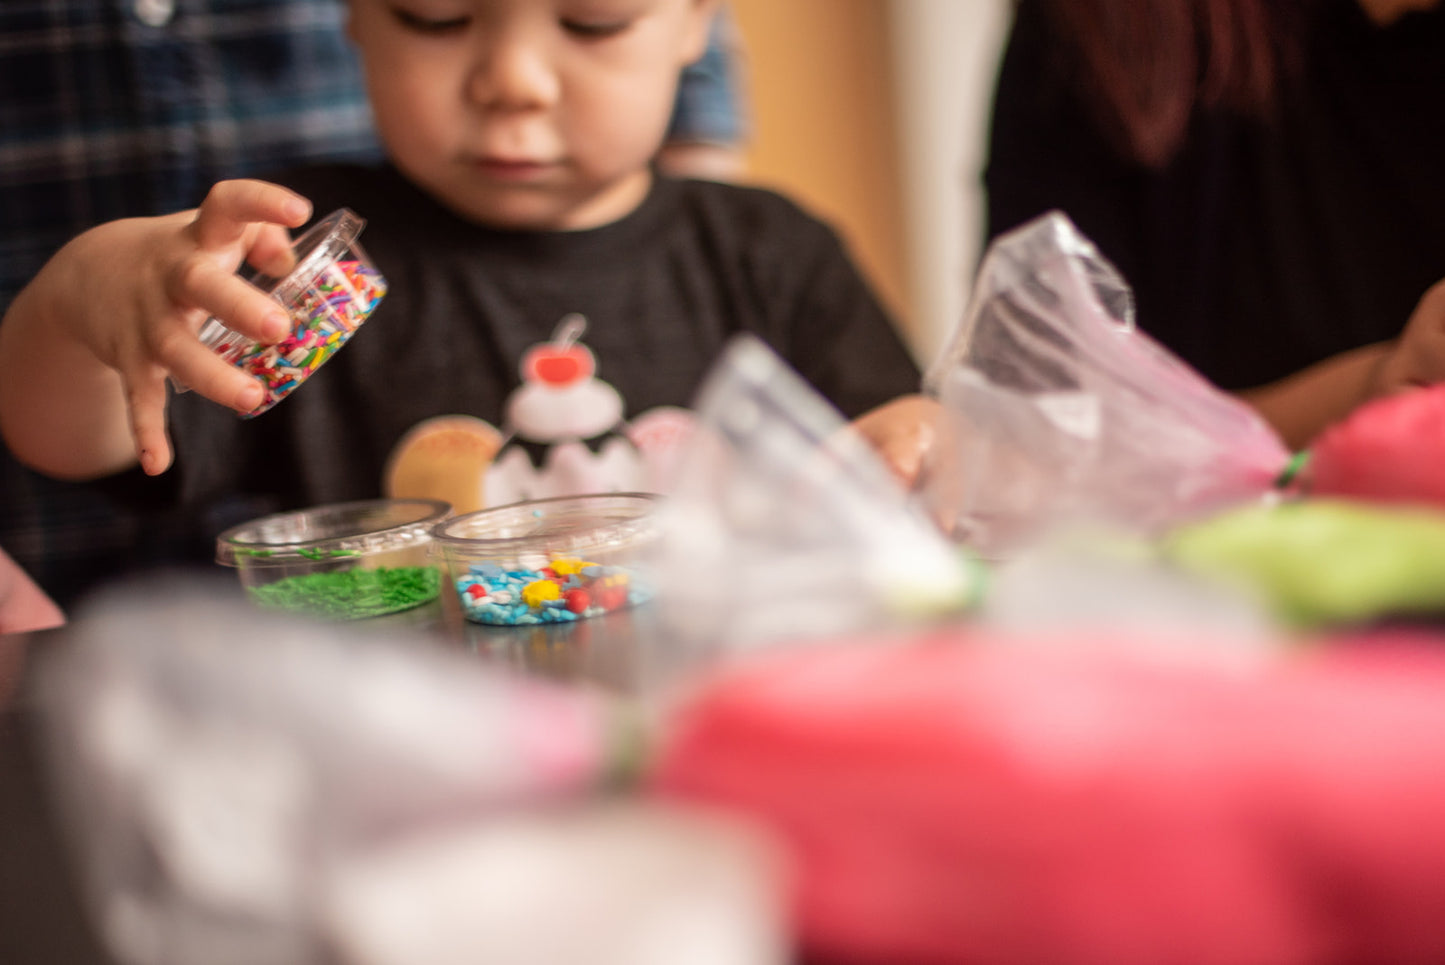 A close-up picture of a little boy at a custom DIY cake party in the Portland area. The boy holds a container of sprinkles. Other cups of sprinkles and piping bags of colorful frosting rest on the table in front of him.